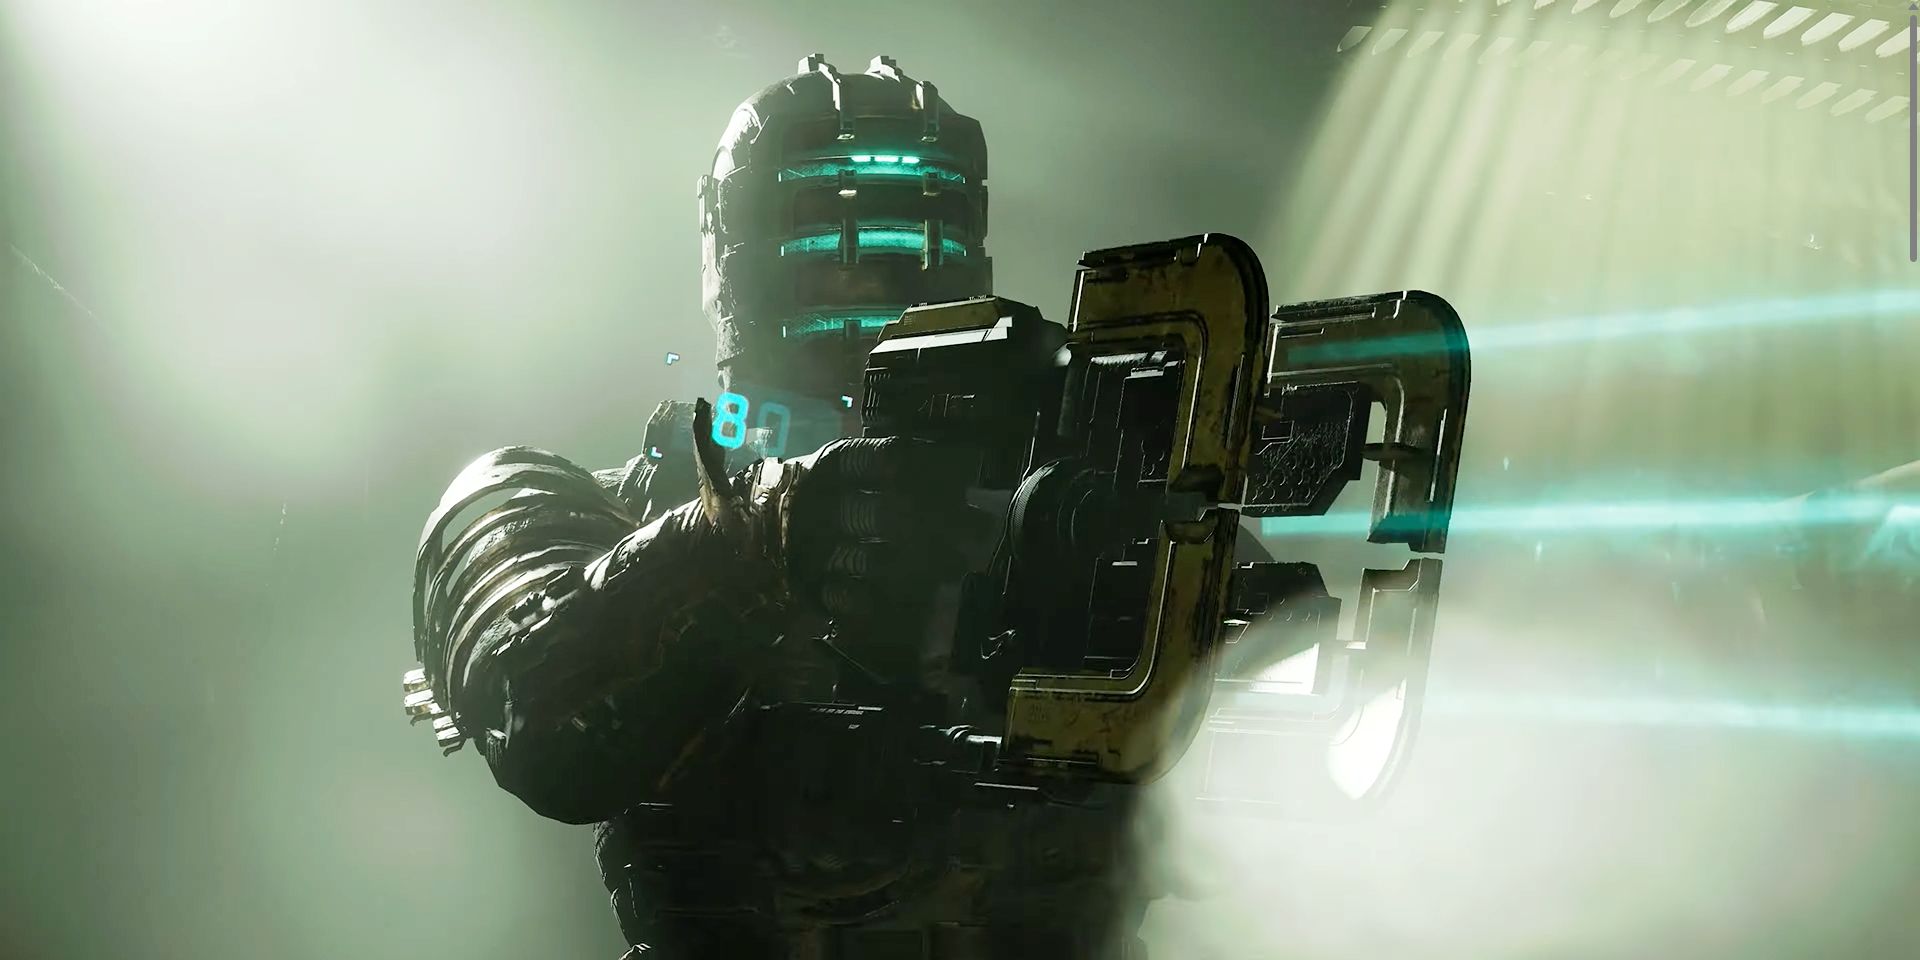 Dead Space remake pre-orders on Steam come with a free copy of Dead Space 2